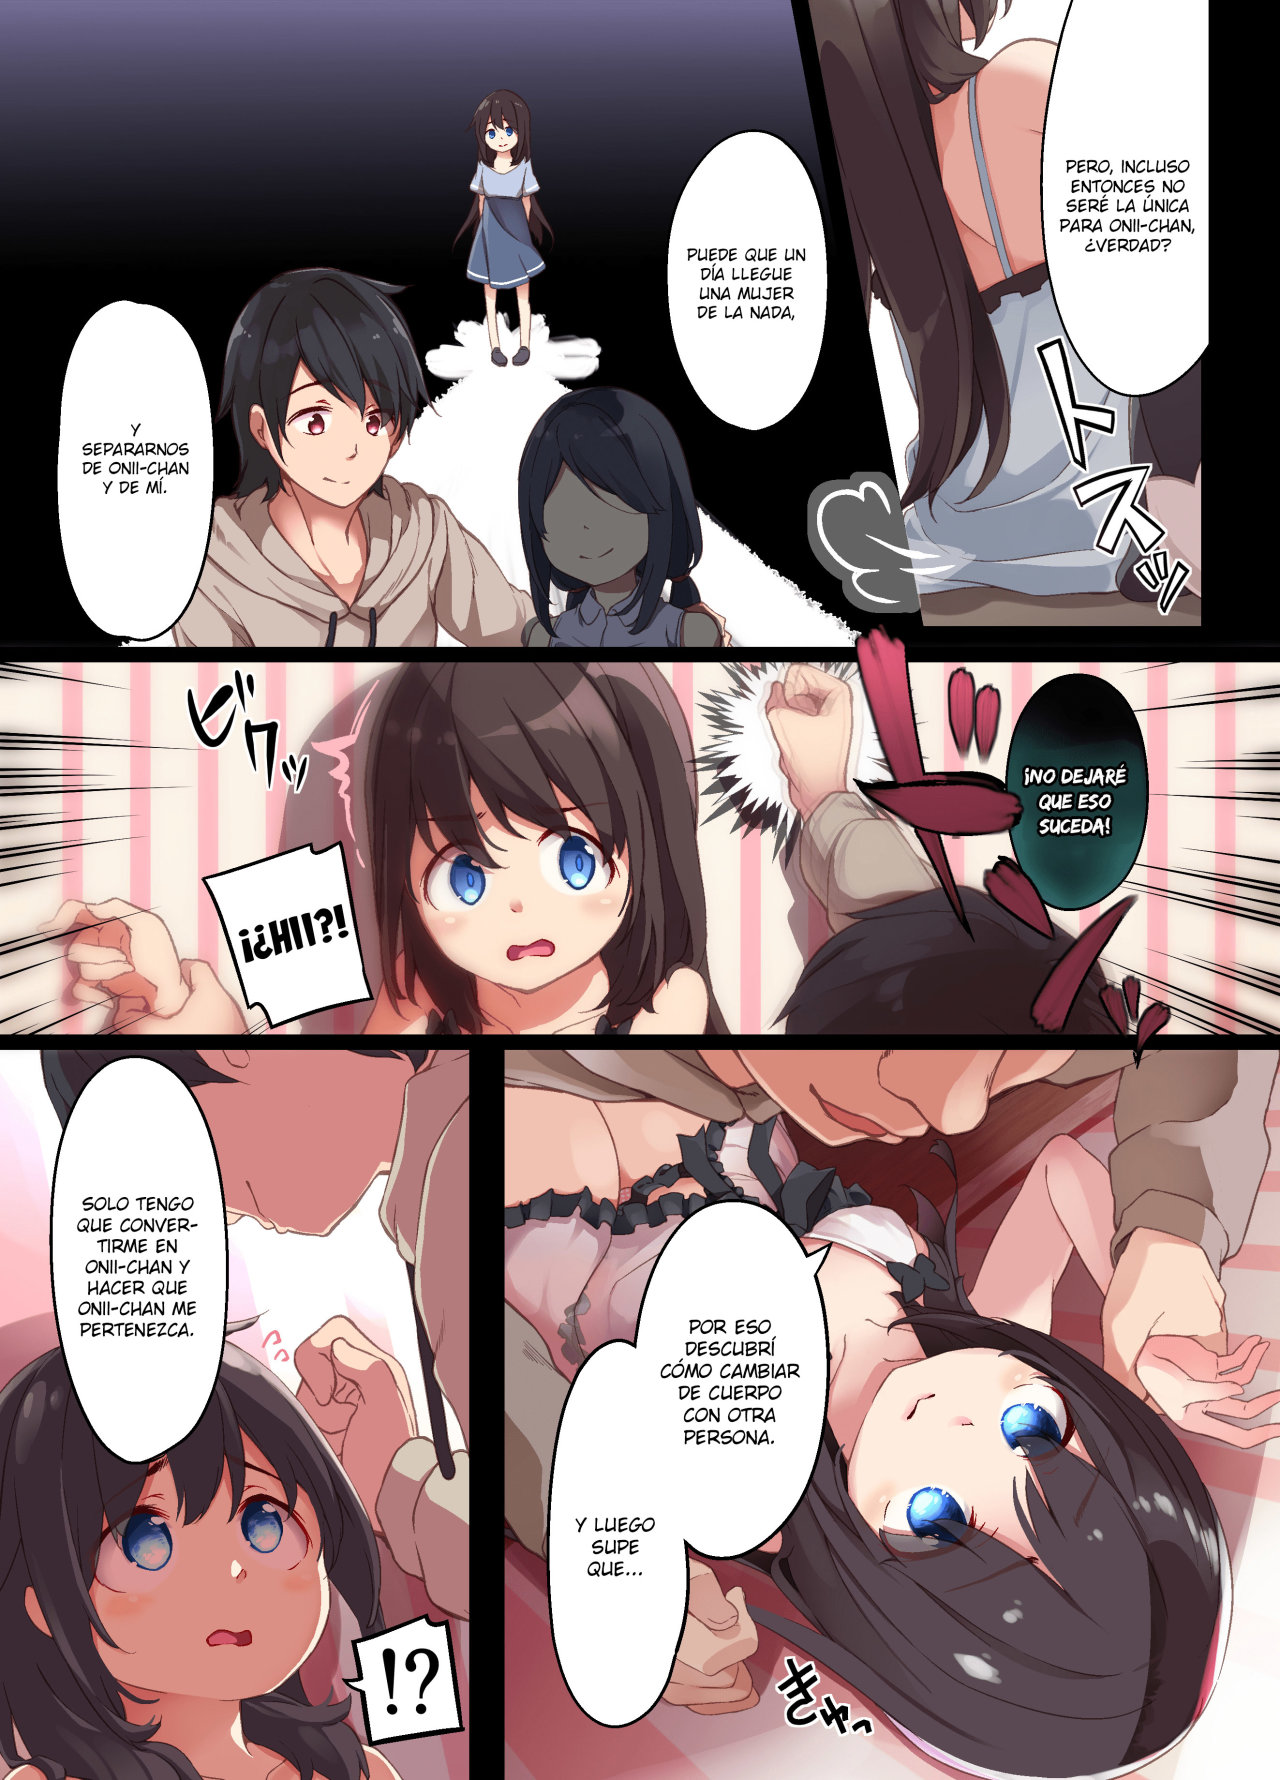 A Yandere Little Sister wants to be impregnated by her big brother - 12